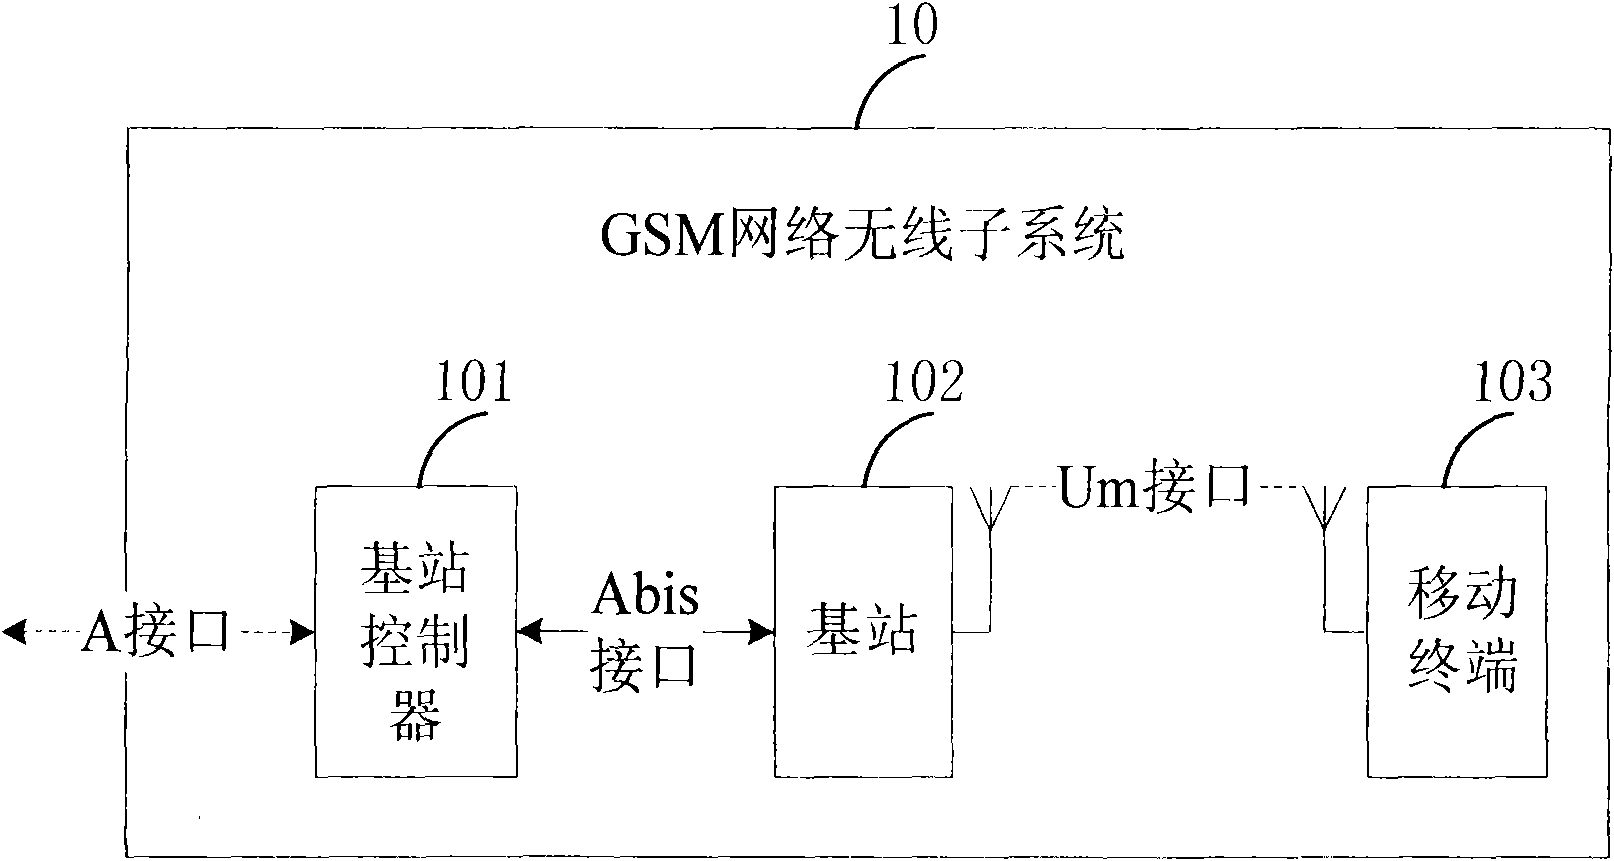 System and method for private network coverage of railway